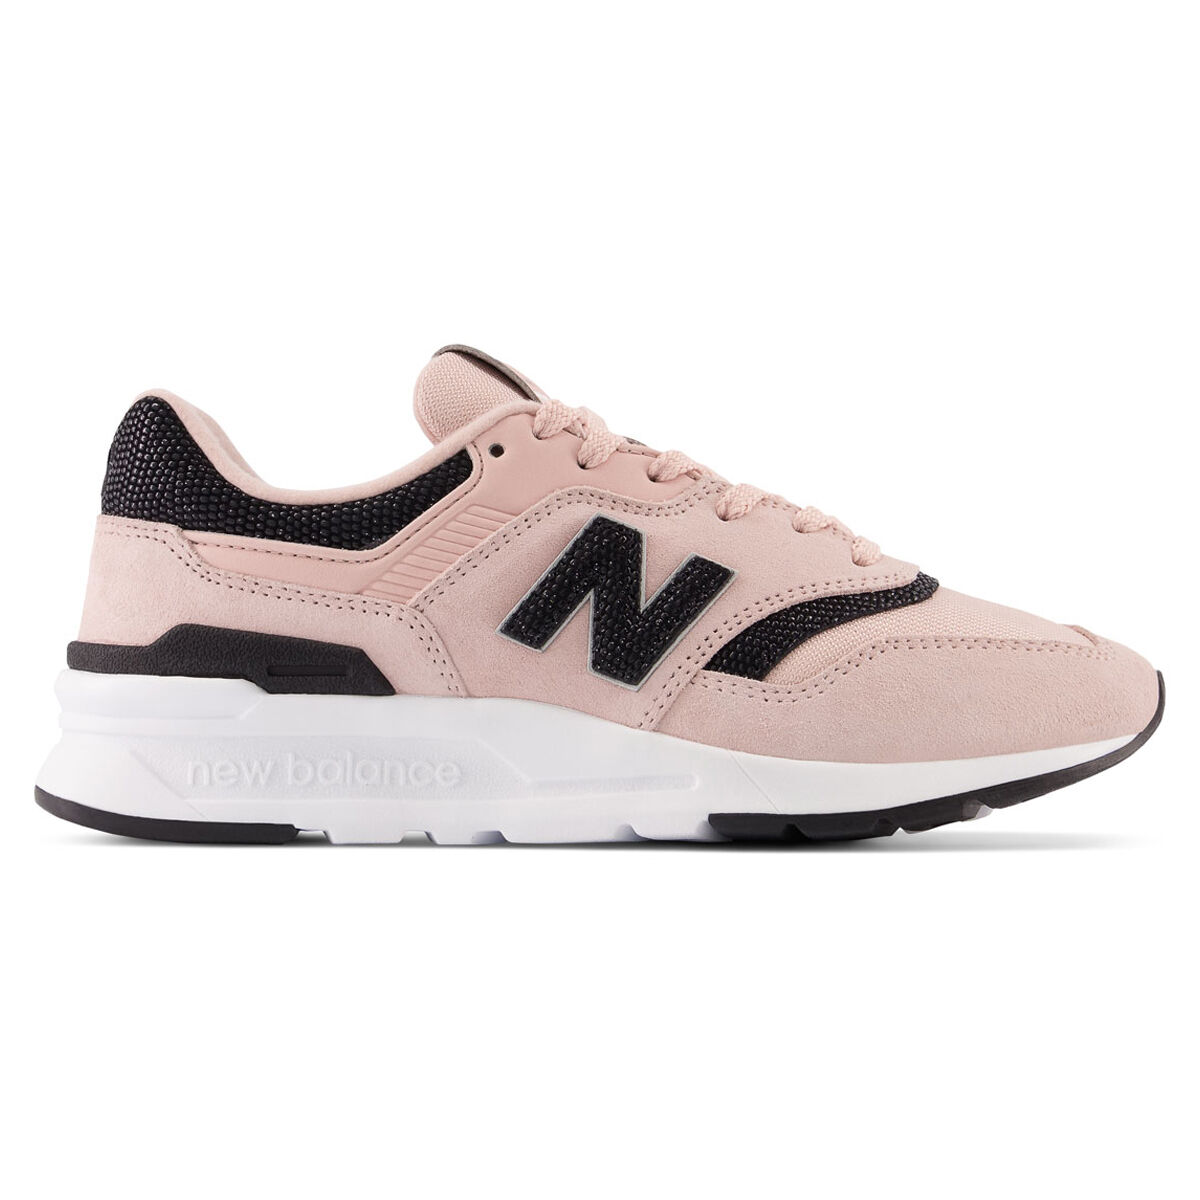 New Balance 997H v1 Womens Casual Shoes | Rebel Sport